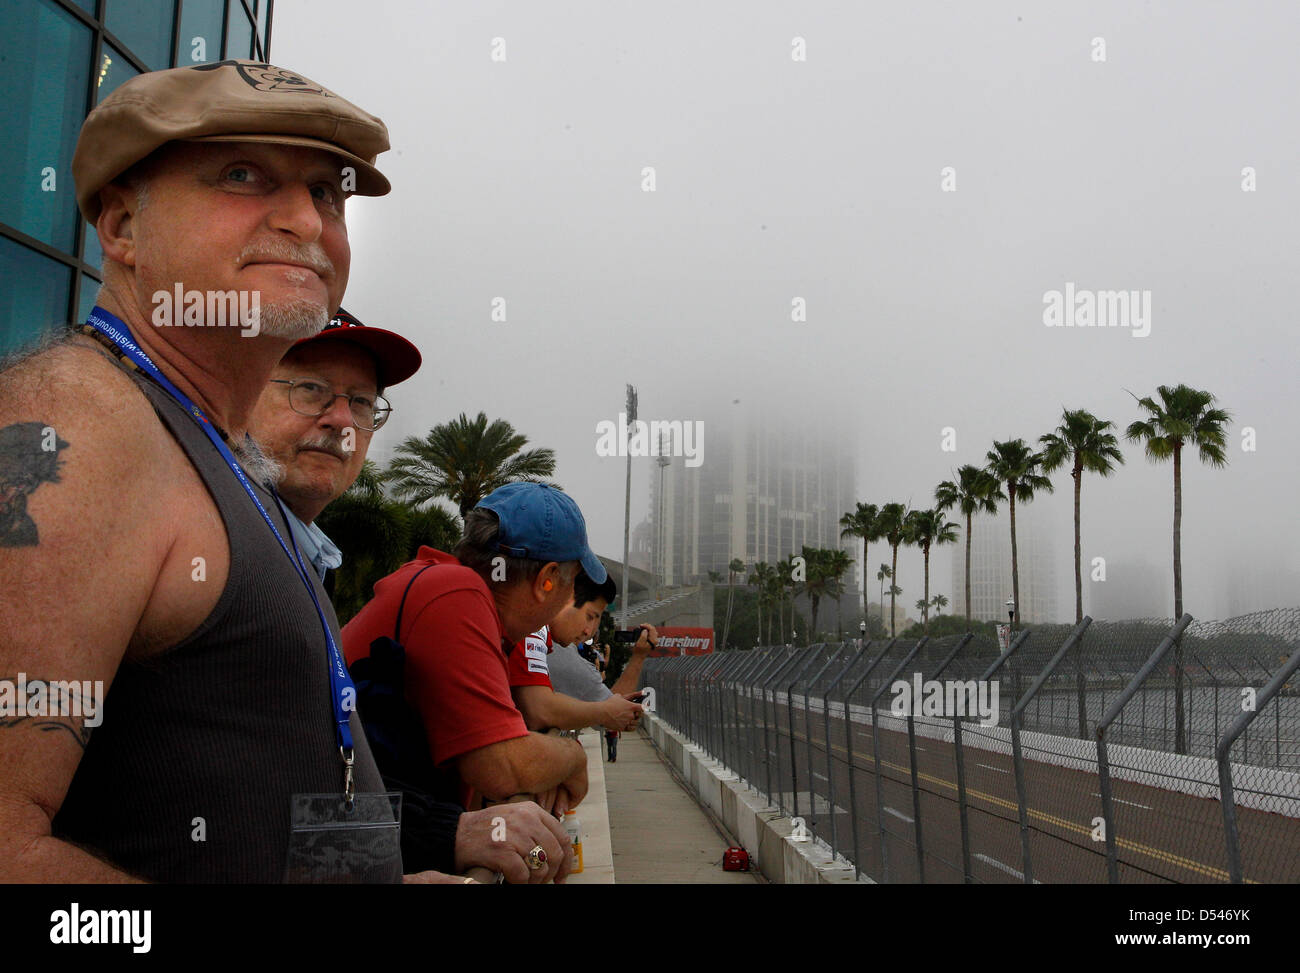 March 24, 2013 - St. Petersburg, Florida, U.S. - DIRK SHADD   |   Times  .Shane Hotchkiss (on left), 51, from Mechanicsville, Maryland, watches along with his brother-in-law Nick Powell, 68, from Clearwater, as fog descends over the city on a gloomy morning as race fans watch during the IndyCar warm-ups at the Honda Grand Prix of St. Petersburg Sunday morning (03/24/13). The rainy forecast remains a concern as the starts time for the race approaches. (Credit Image: © Dirk Shadd/Tampa Bay Times/ZUMAPRESS.com) Stock Photo